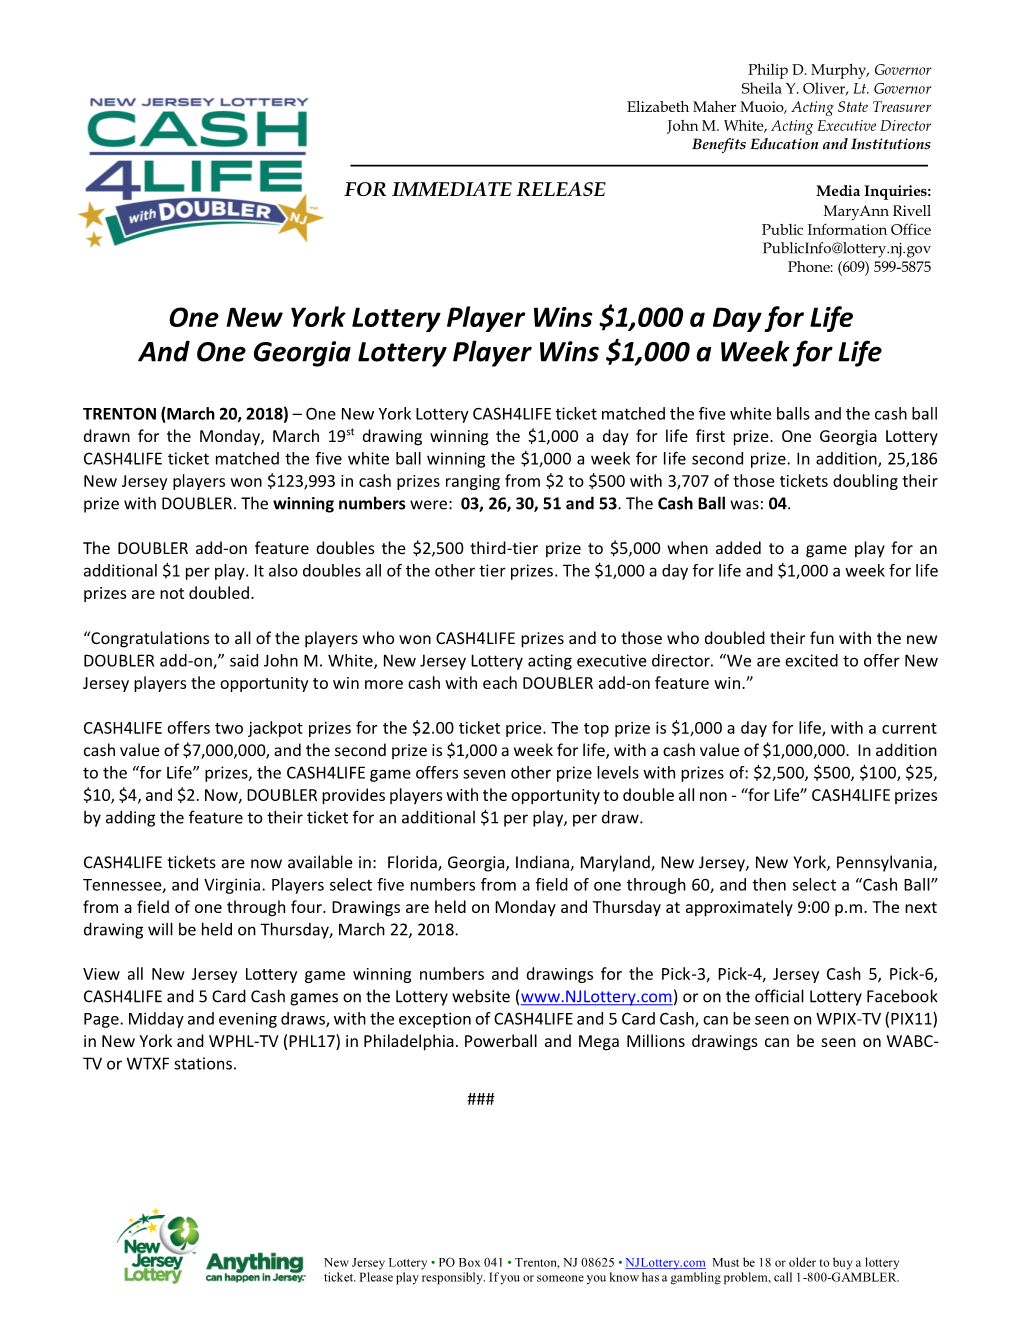 New Jersey Lottery Acting Executive Director